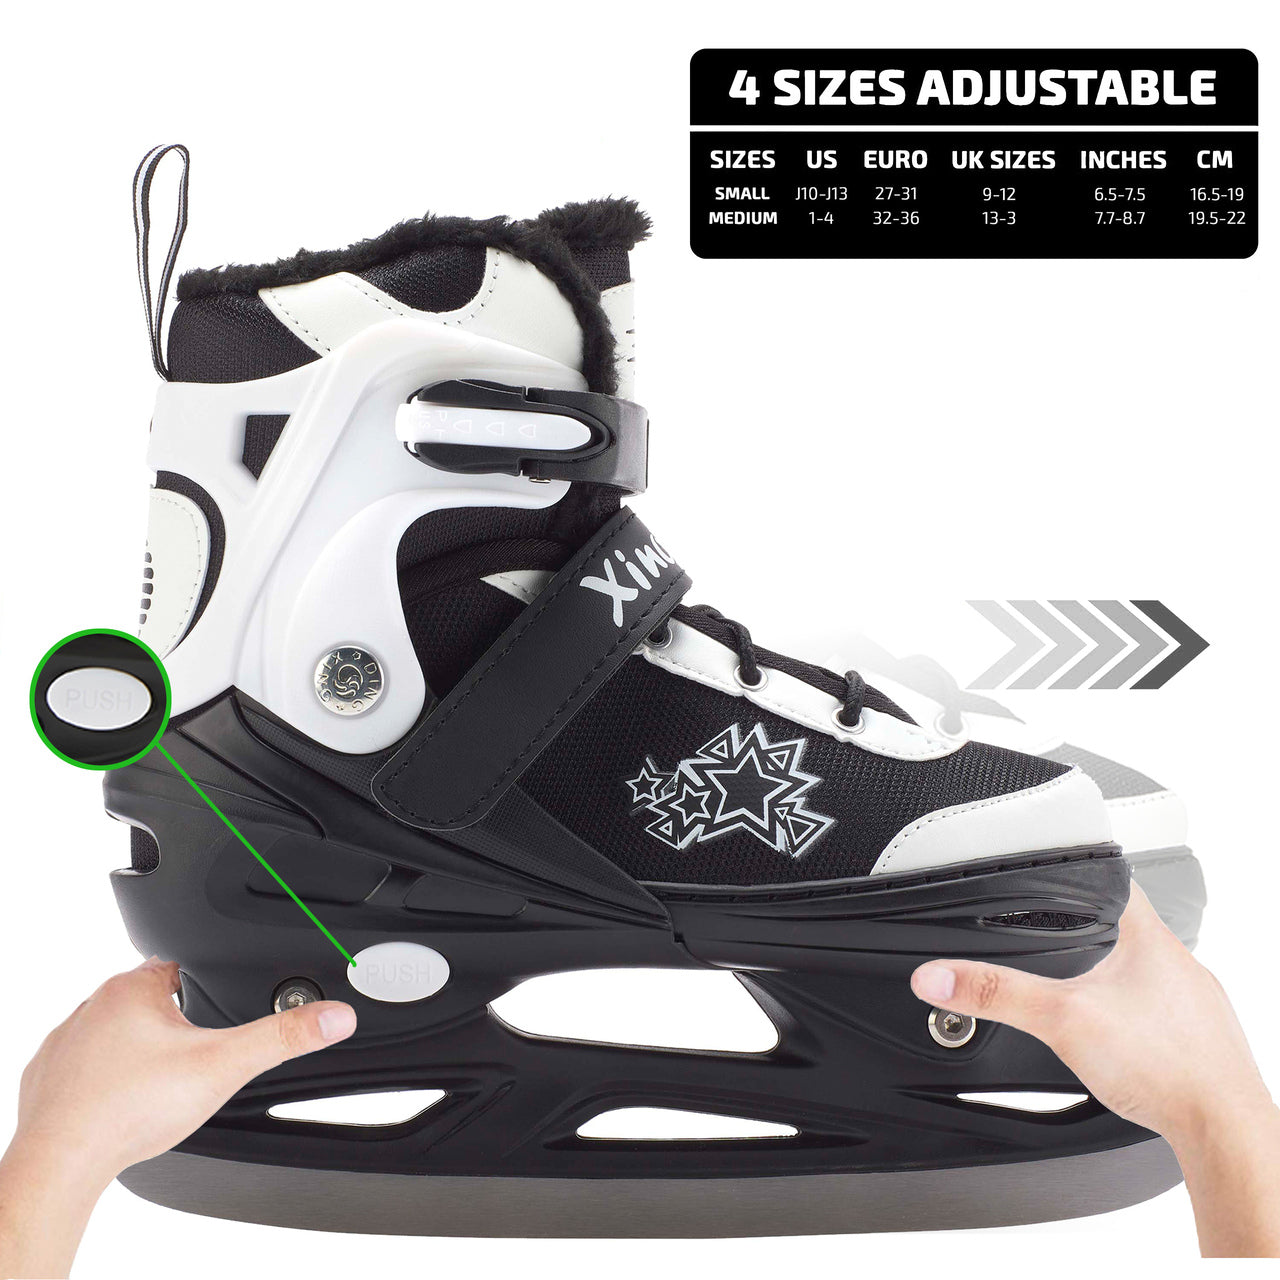 Ice Skates for Boys and Girls Adjustable Reinforced